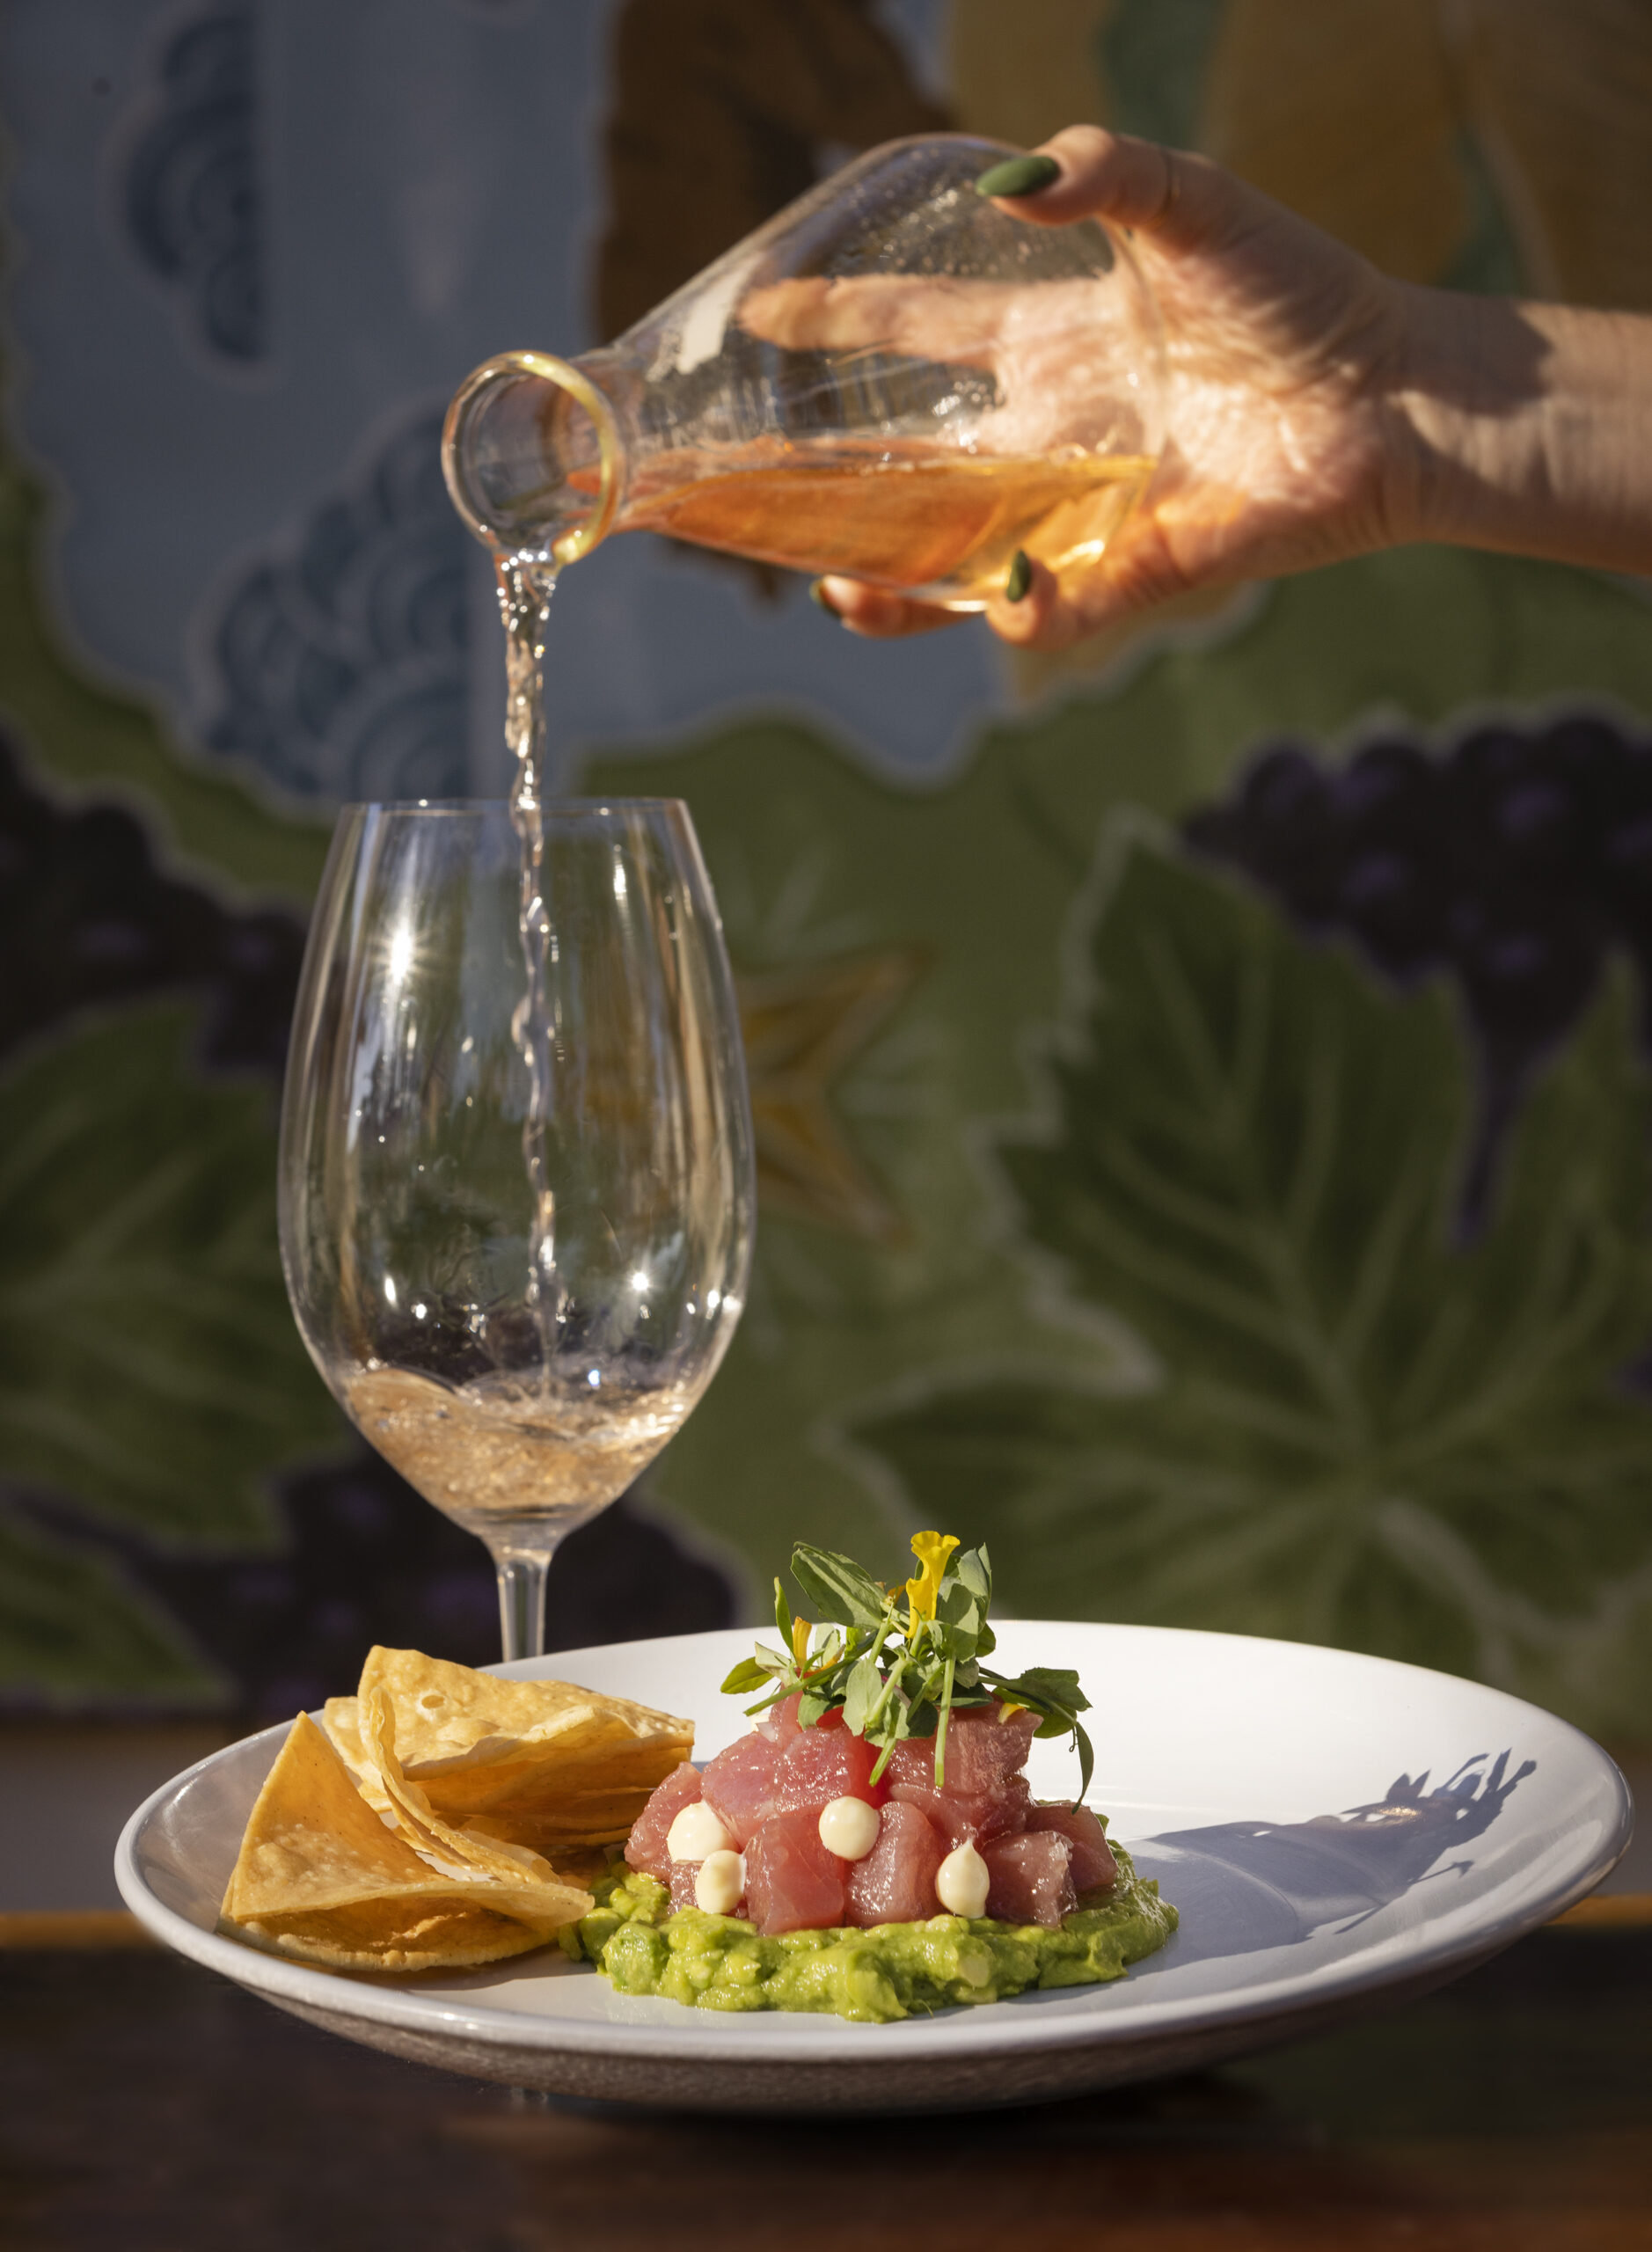 Sushi Grade Ahi Tuna with avocado, kewpie and served with chips from served with ÒTwice RemovedÓ Ros from the taps at Kivelstadt Cellars and WineGarten at the corner of Hwy 12 and Hwy 121 in Sonoma Thursday, October 20, 2022. (John Burgess/The Press Democrat)